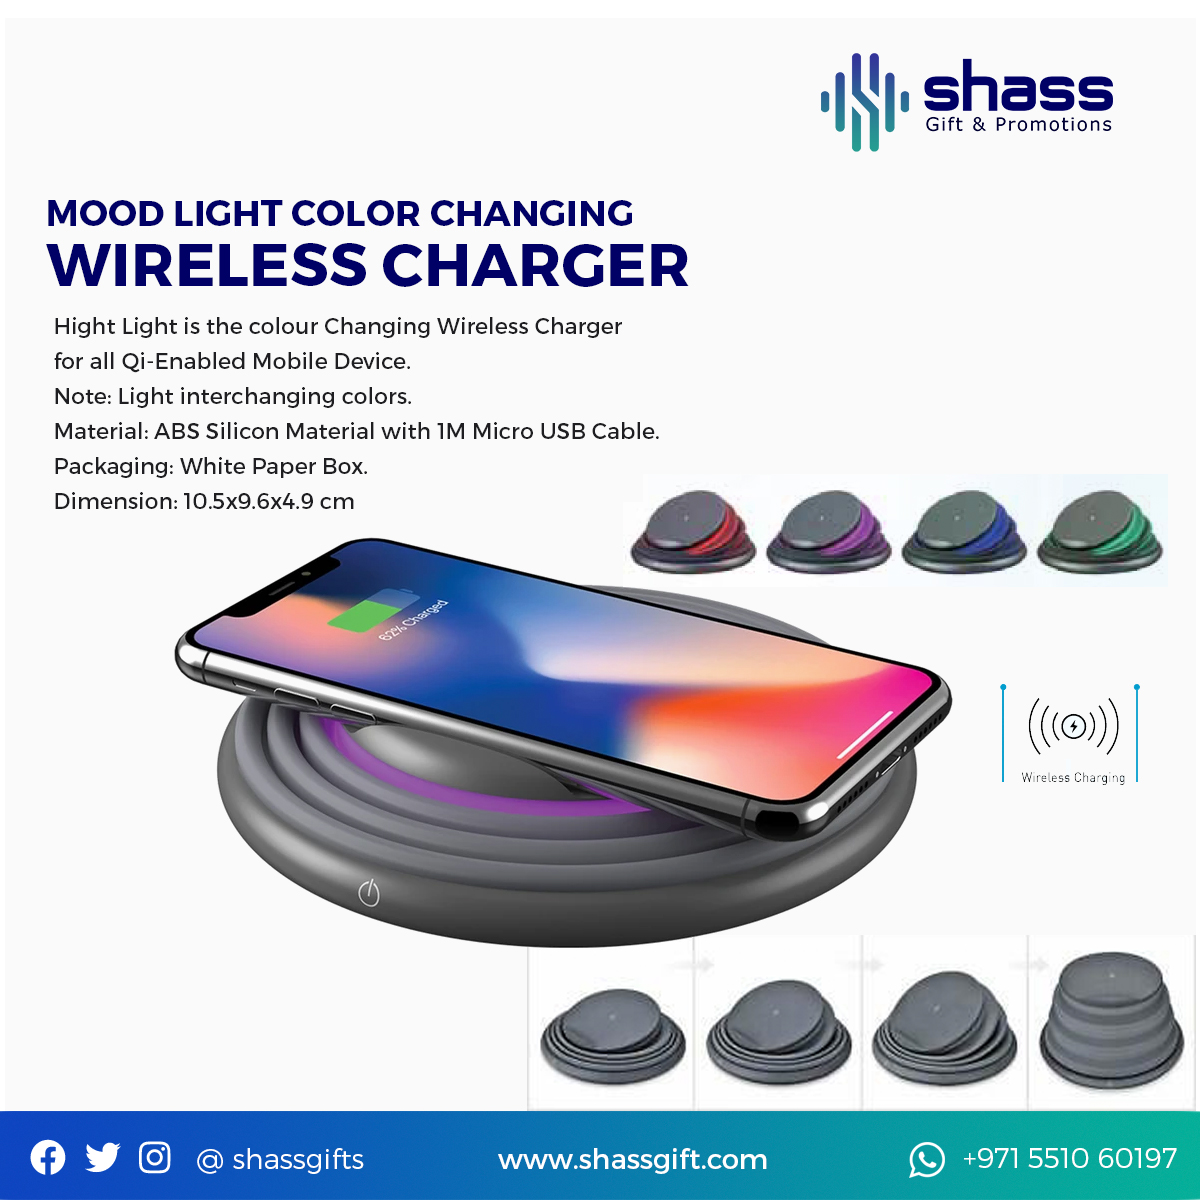 Mood Light Color Changing Wireless Charger